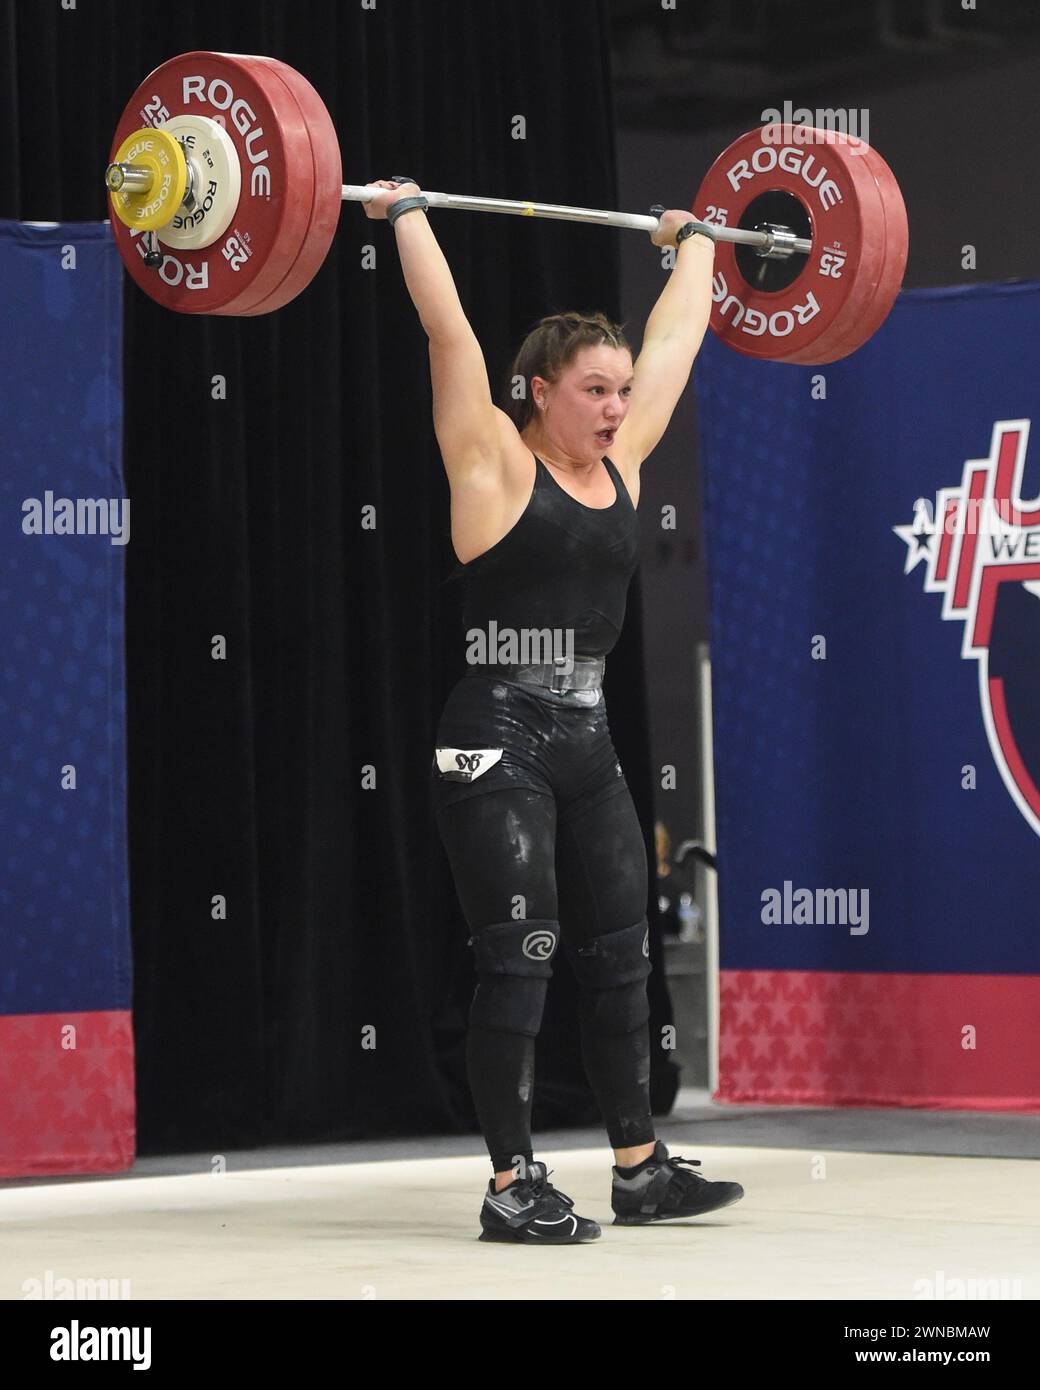 Columbus, Ohio, United States. Mar 1 Feb, 2024. Ella Nicholson lifts 133kgs in the clean and jerk in the Women's Weightlifting Championships at the Arnold Sports Festival in Columbus, Ohio, USA. This lift was a Junior American Record. Credit: Brent Clark/Alamy Live News Stock Photo